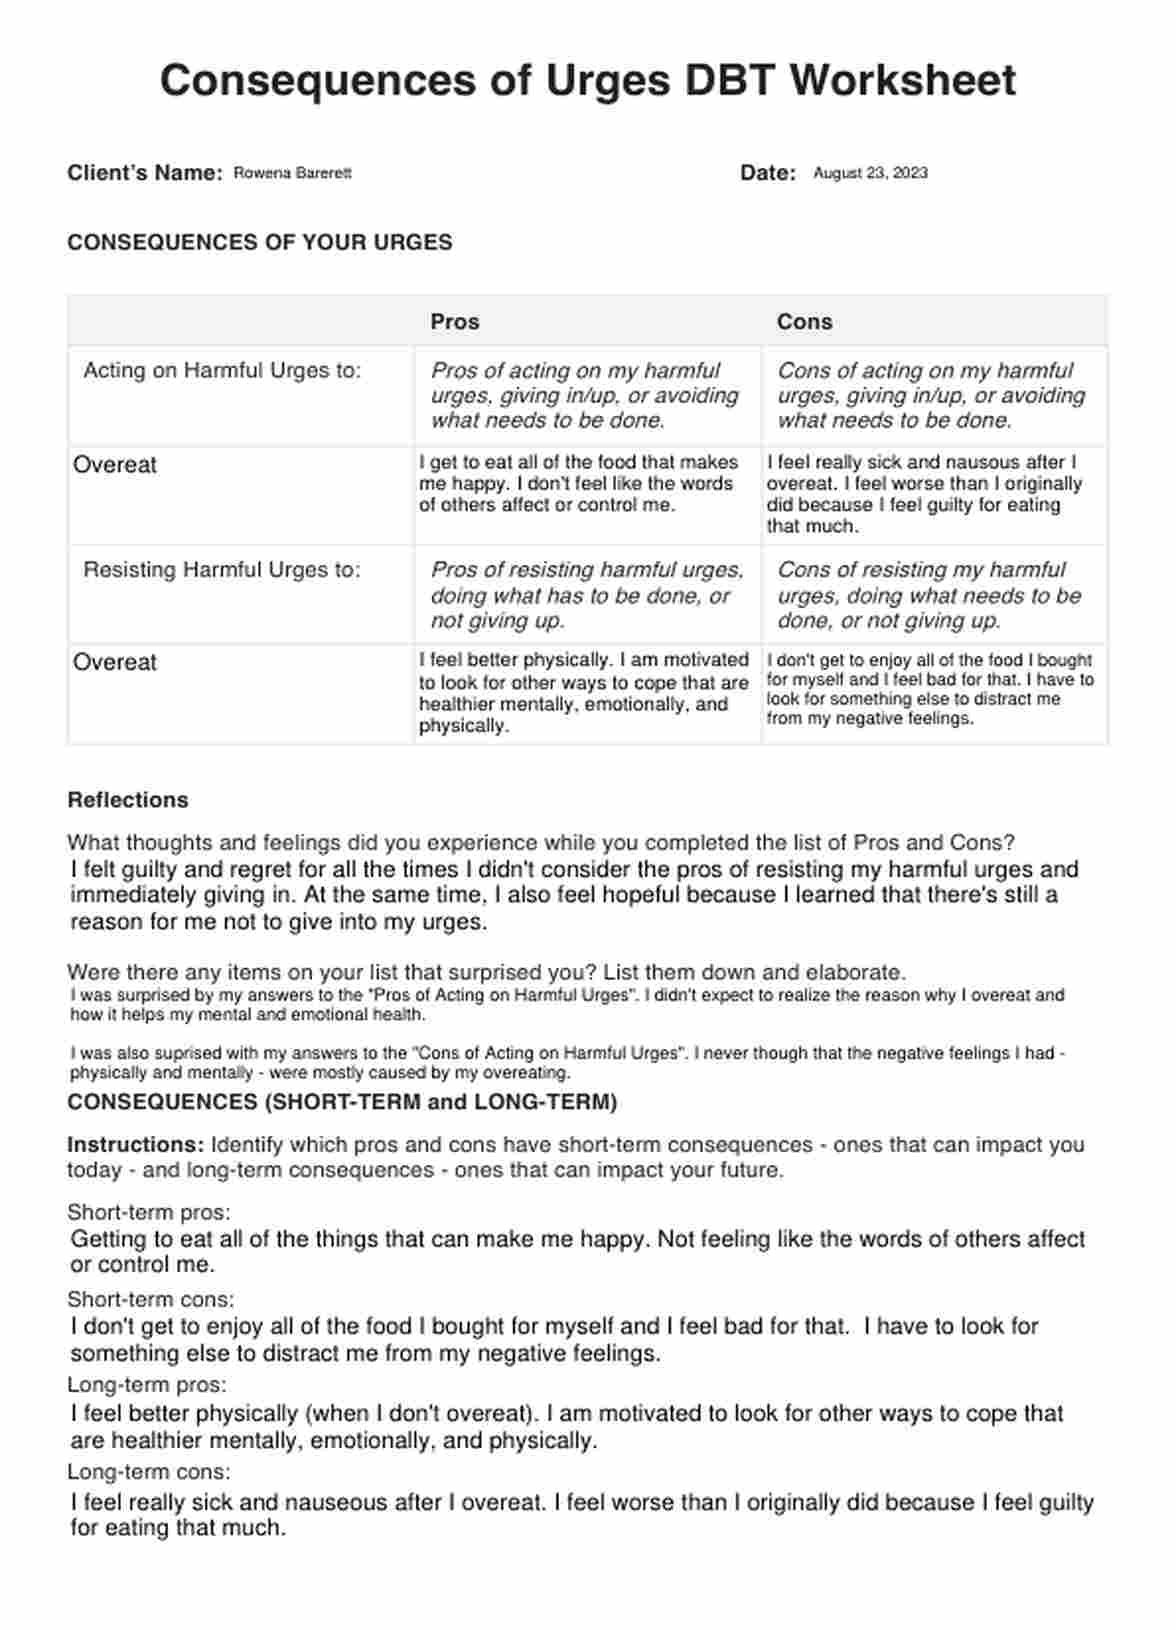 Consequences of Urges DBT Worksheet PDF Example